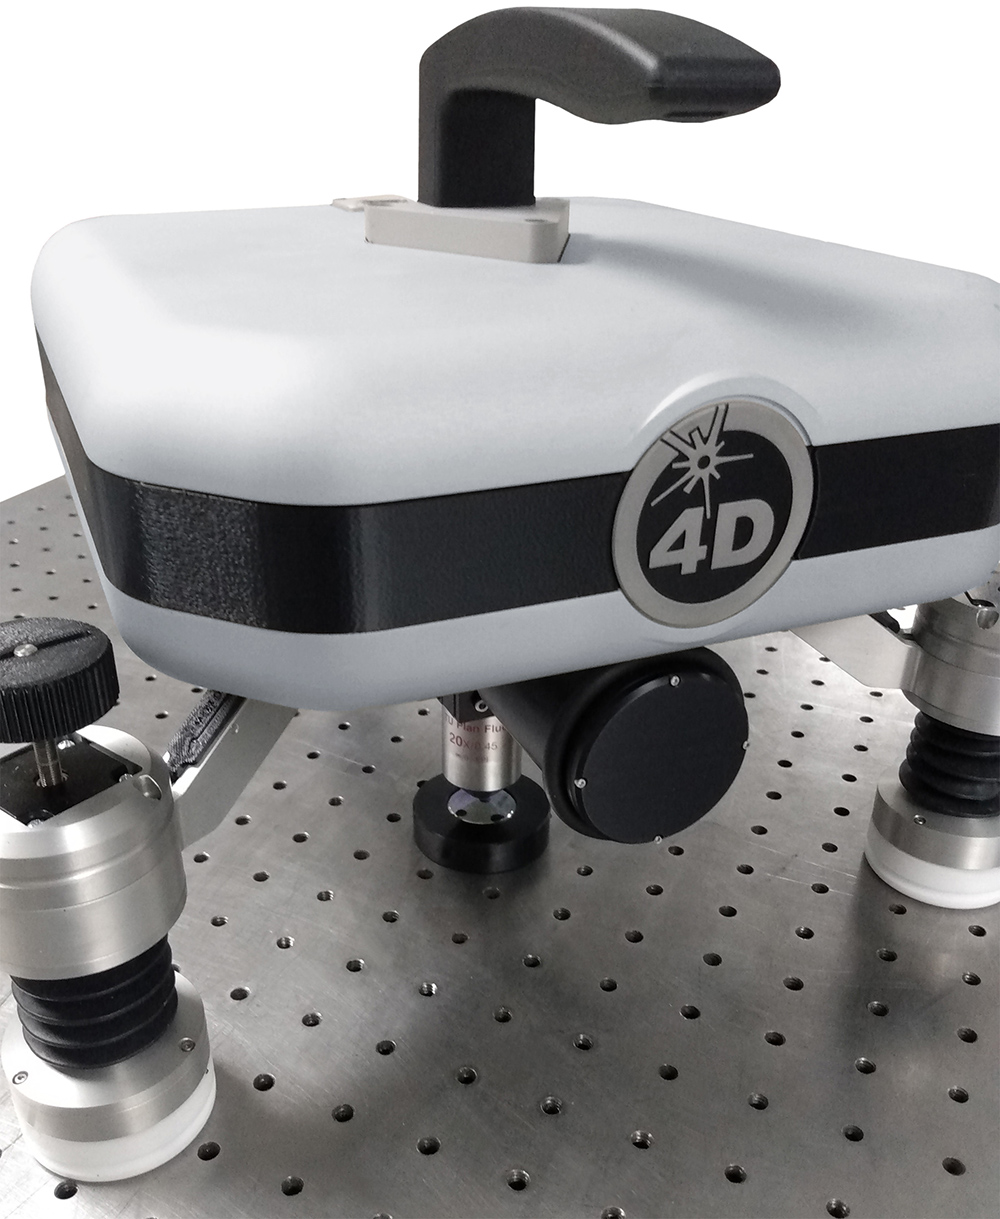 4D Technology’s NanoCam HD provides reliable, non-contact, 3D measurement of supersmooth optical surfaces